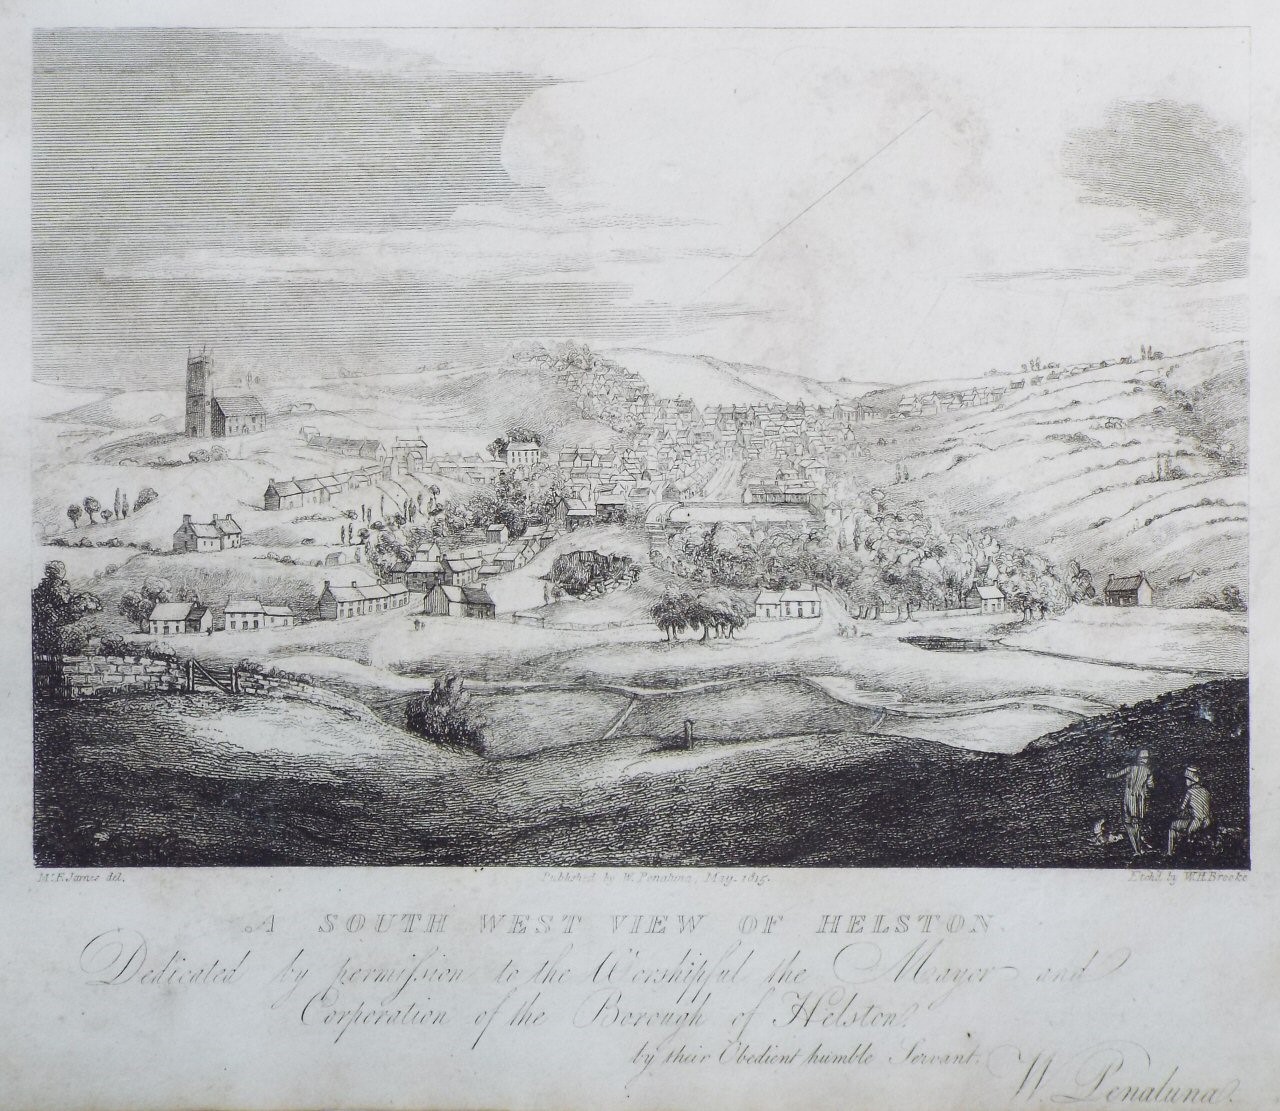 Print - A South West View of Helston. Dedicated by permission to the Worshipful the Mayor and Corporation of the Borough of Helston. by their Obedient humble Servant, W. Penaluna. - Brooke